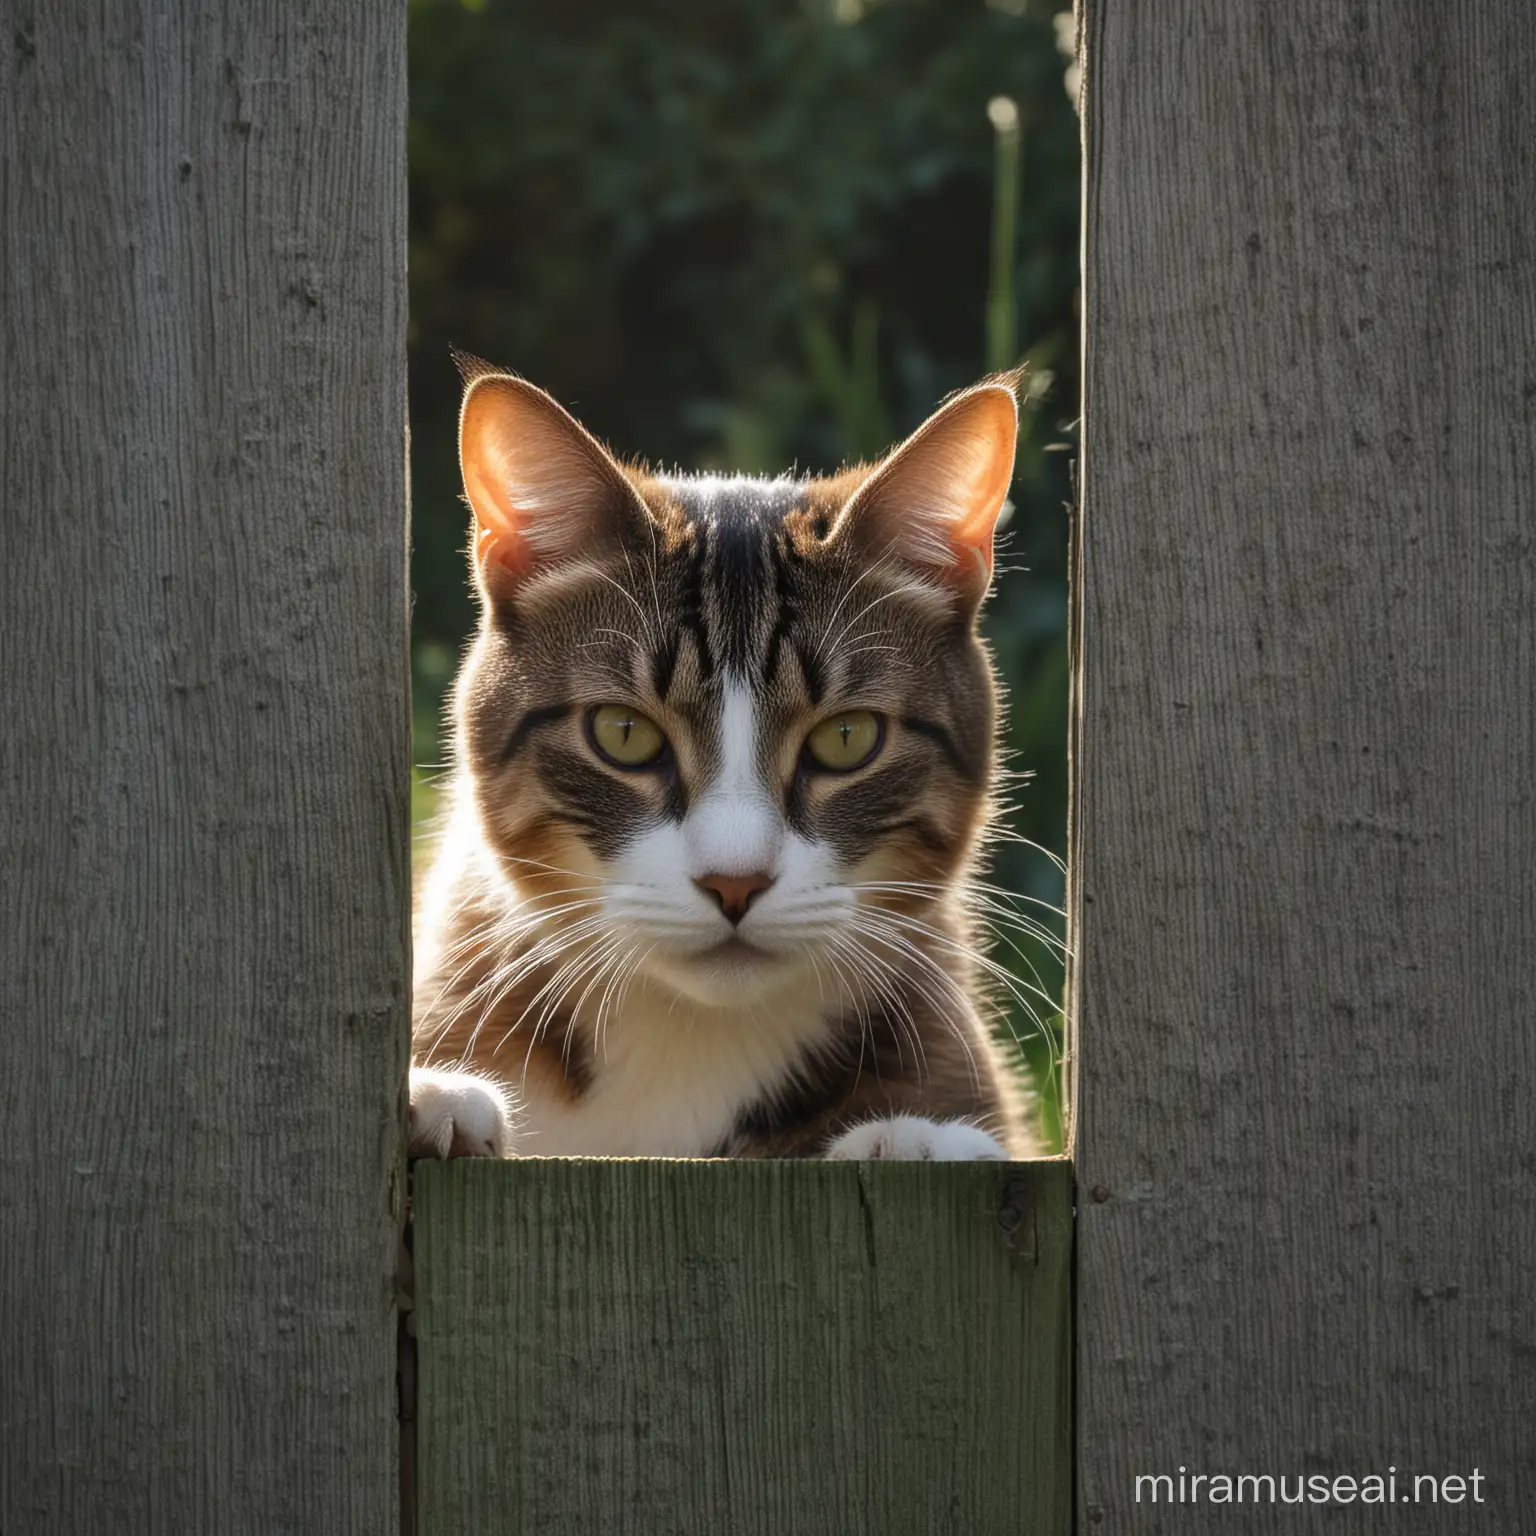 Curious Cat Peeking Through Garden Fence with Vivid Detail and Play of Light and Shadow